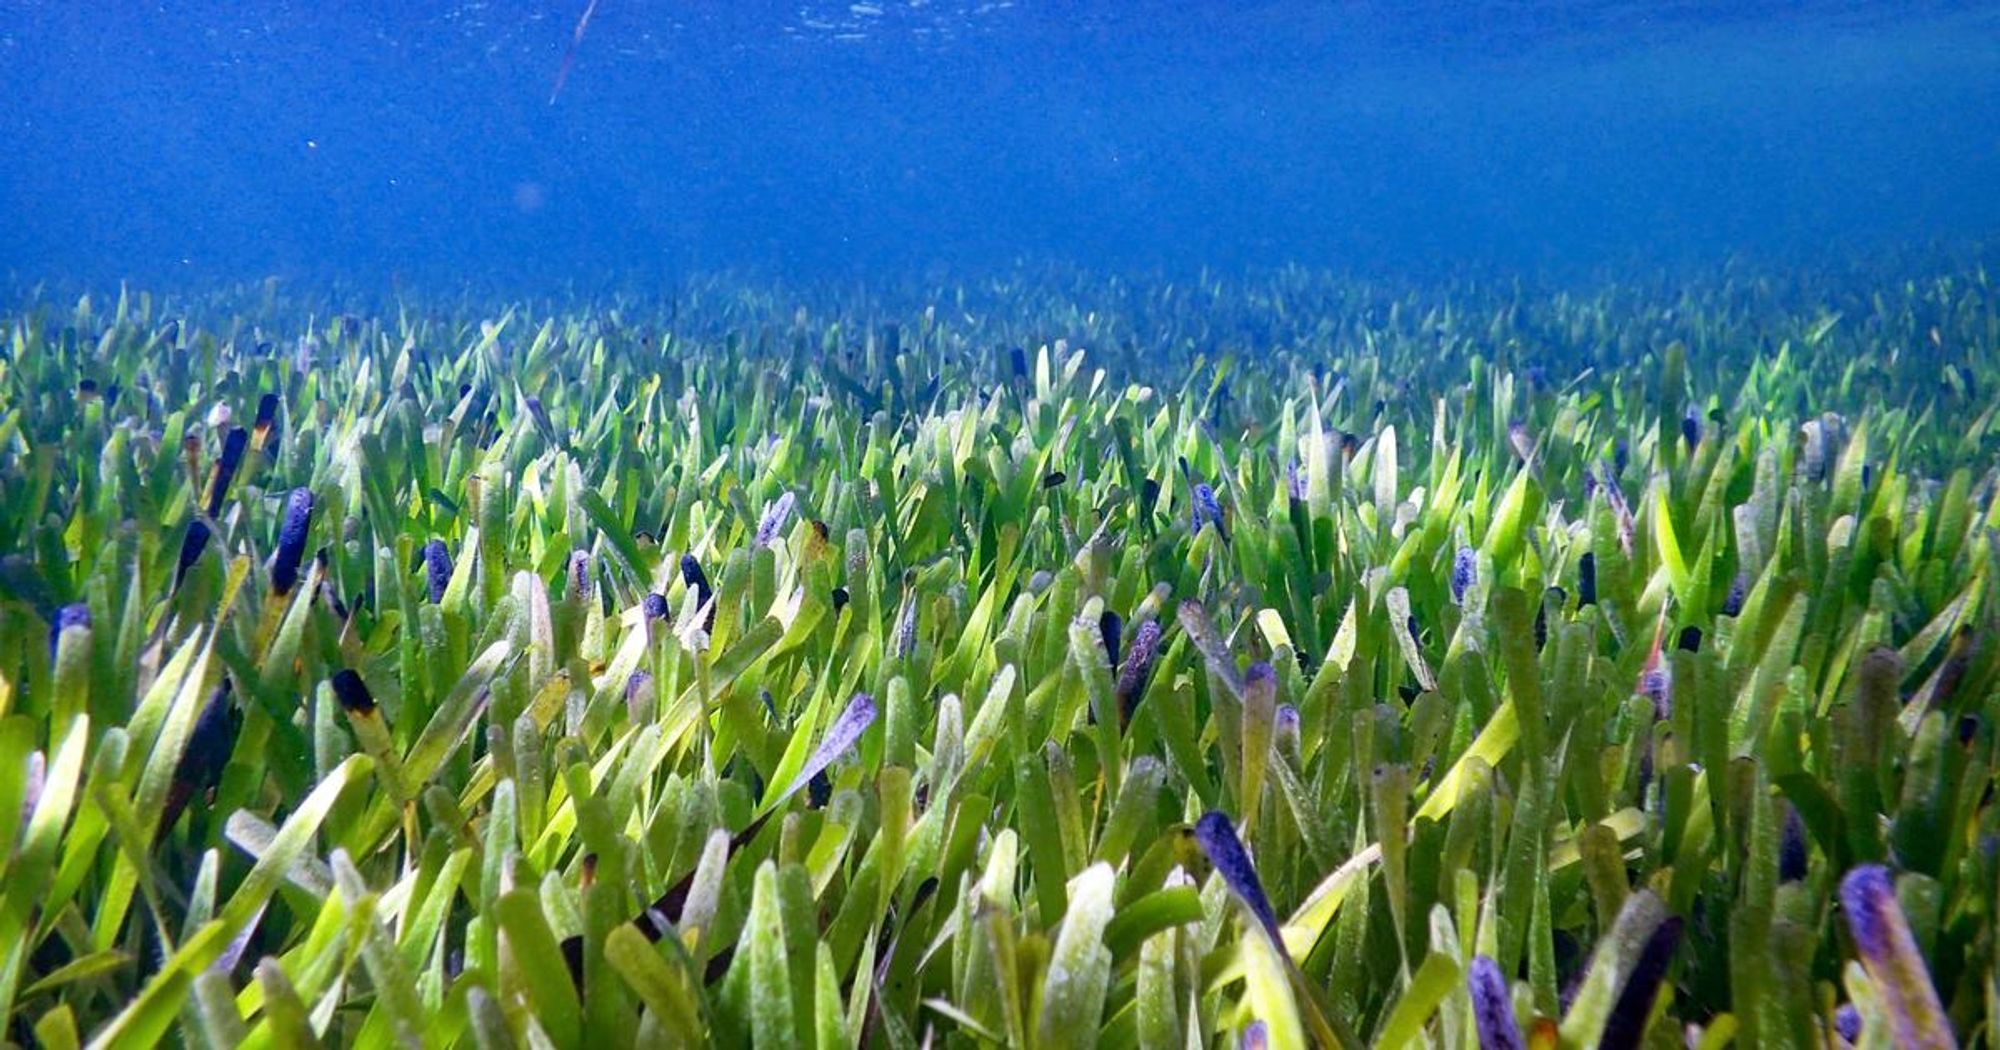 World's largest plant: 112-mile-long seagrass found off Australian coast